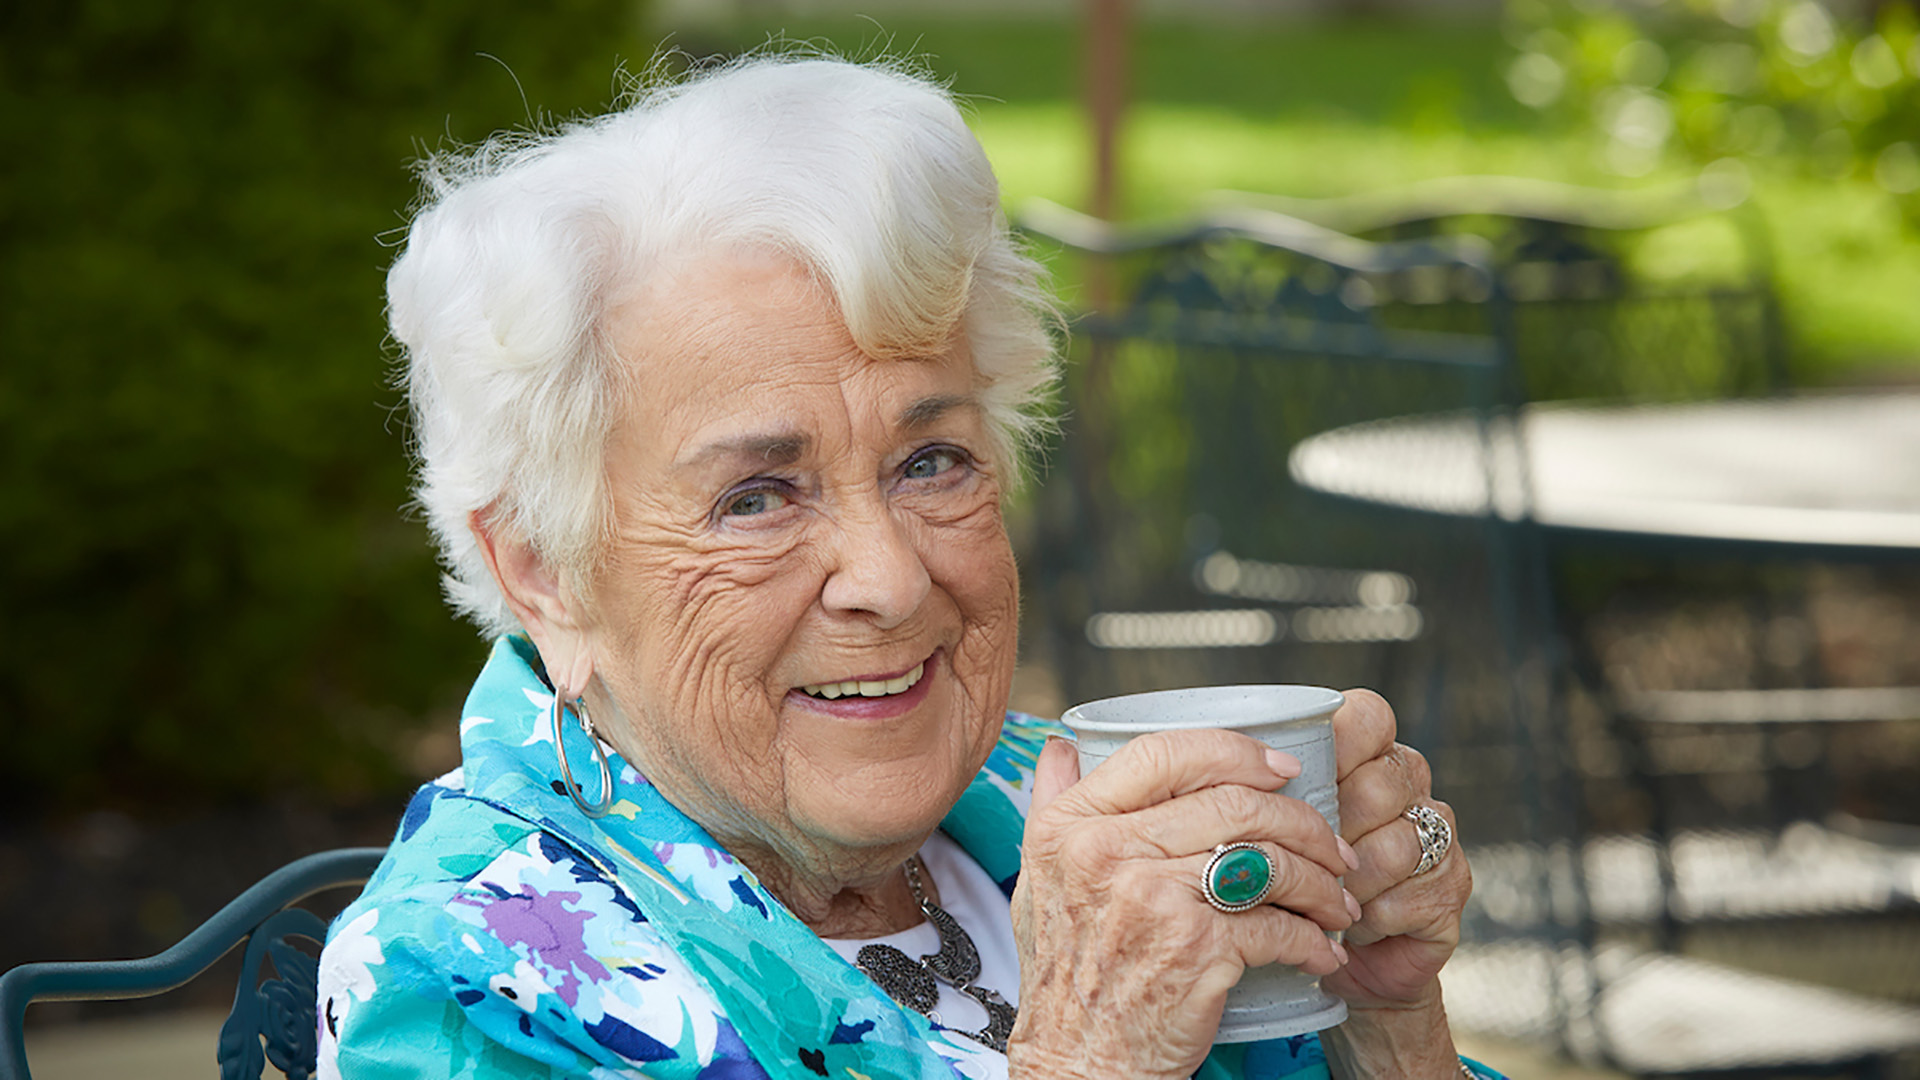 Featured image for “A Day in a Life: What To Expect in Assisted Living”